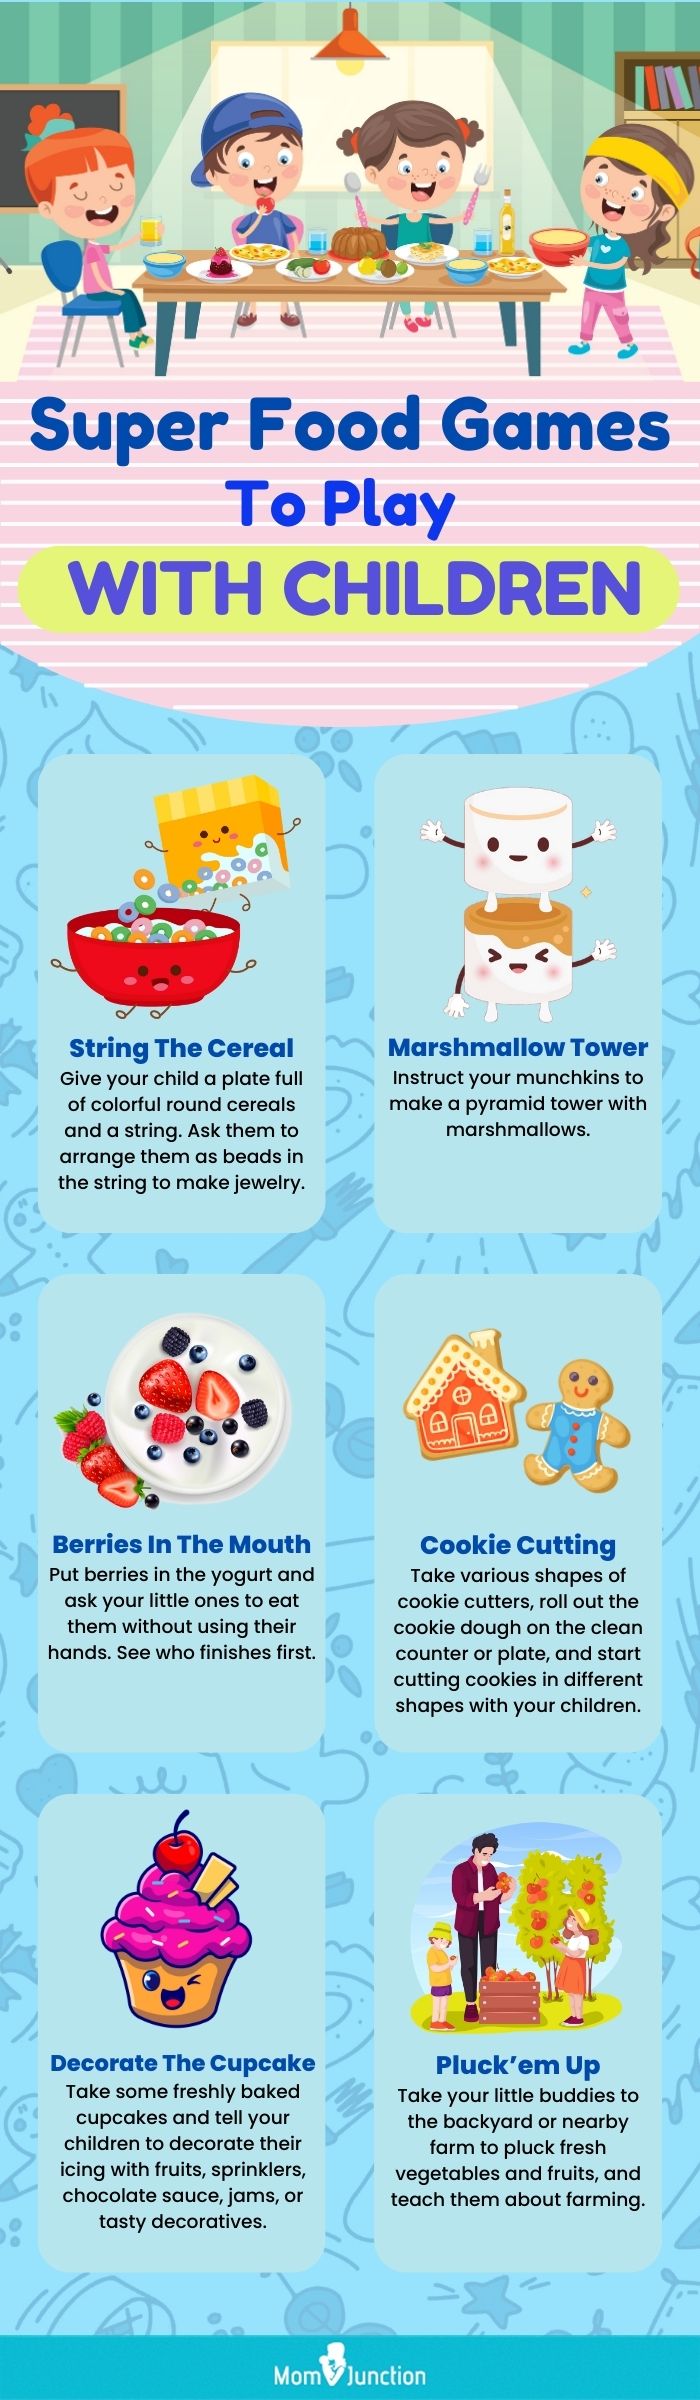 https://www.momjunction.com/wp-content/uploads/2022/12/Super-Food-Games-To-Play-With-Children.jpg